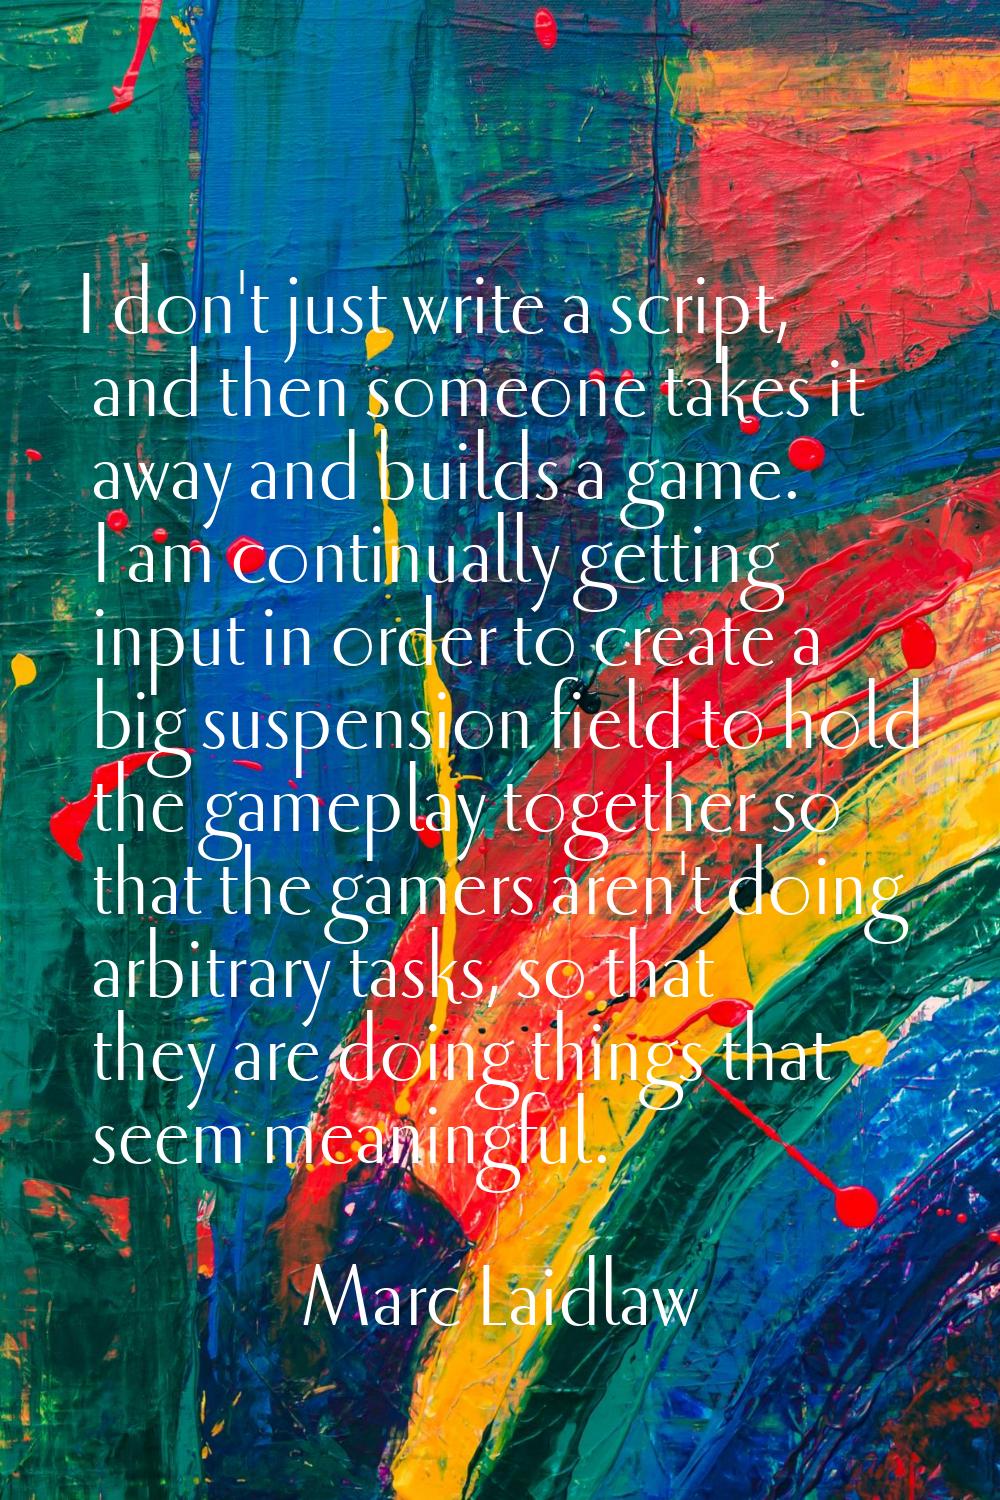 I don't just write a script, and then someone takes it away and builds a game. I am continually get